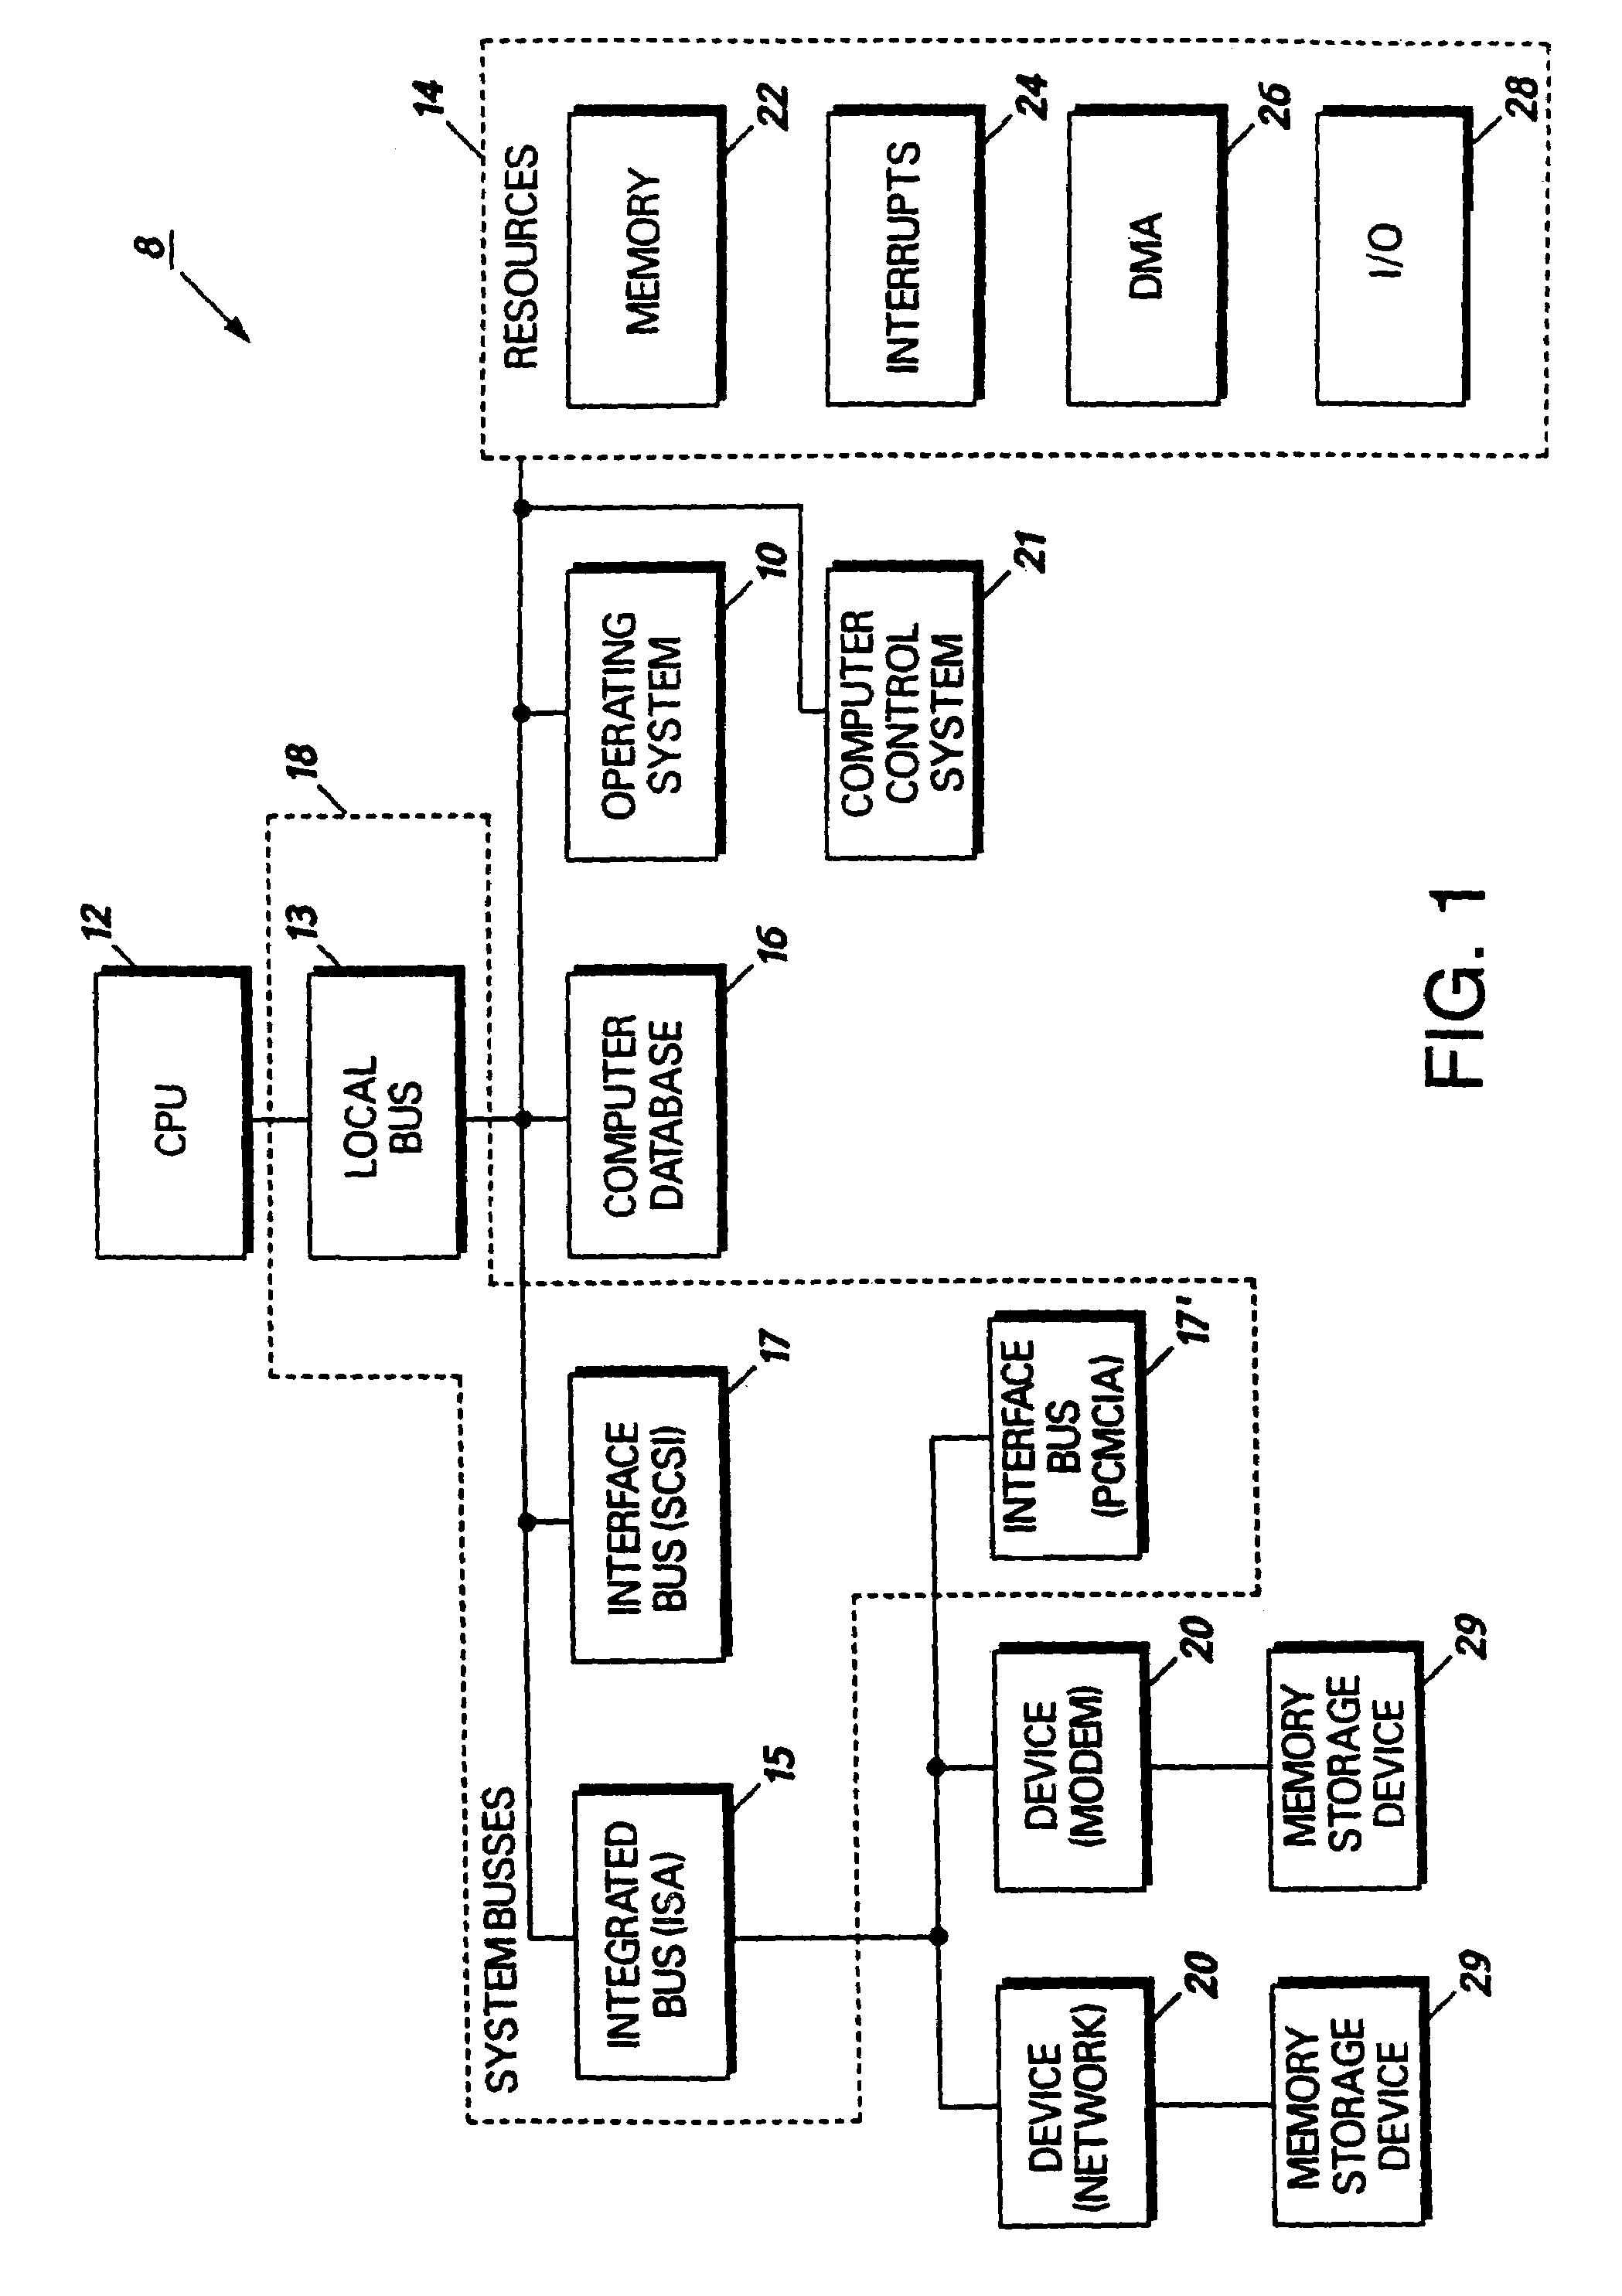 System for allocating resources in a computer system